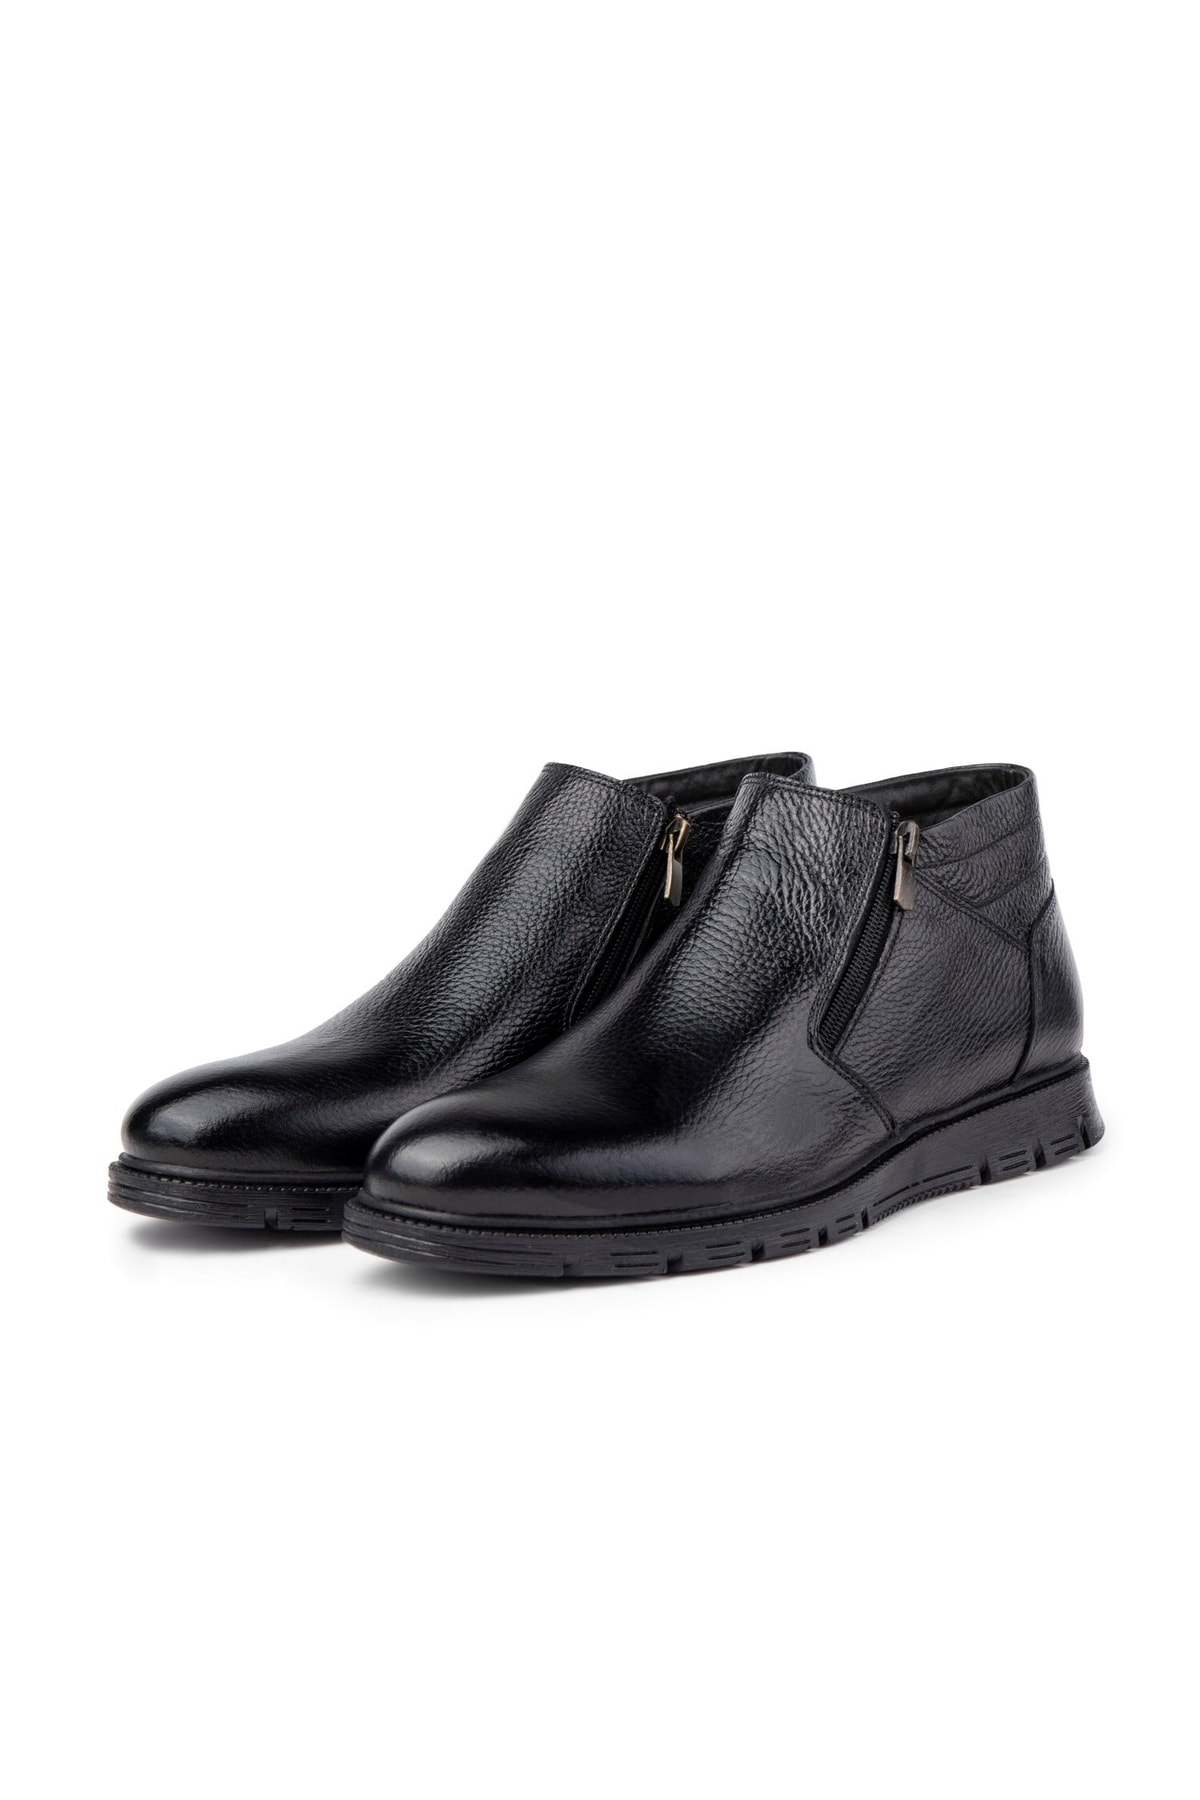 Levně Ducavelli Moyna Men's Boots From Genuine Leather With Rubber Sole, Shearling Boots, Sheepskin Shearling Boots.